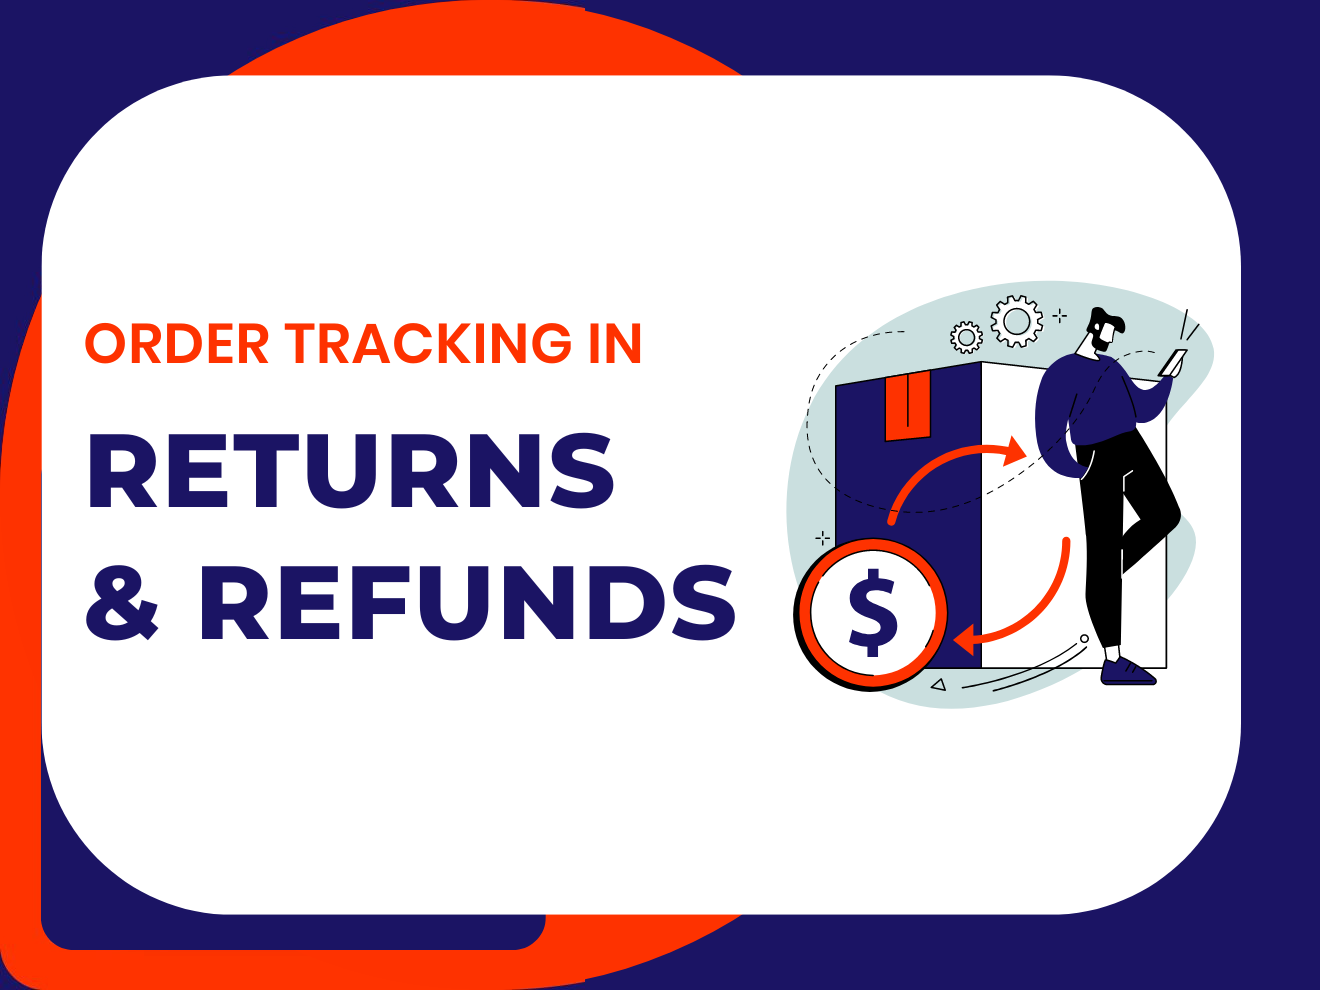 How Order Tracking Helps ECommerce Stores Manage Returns and Refunds